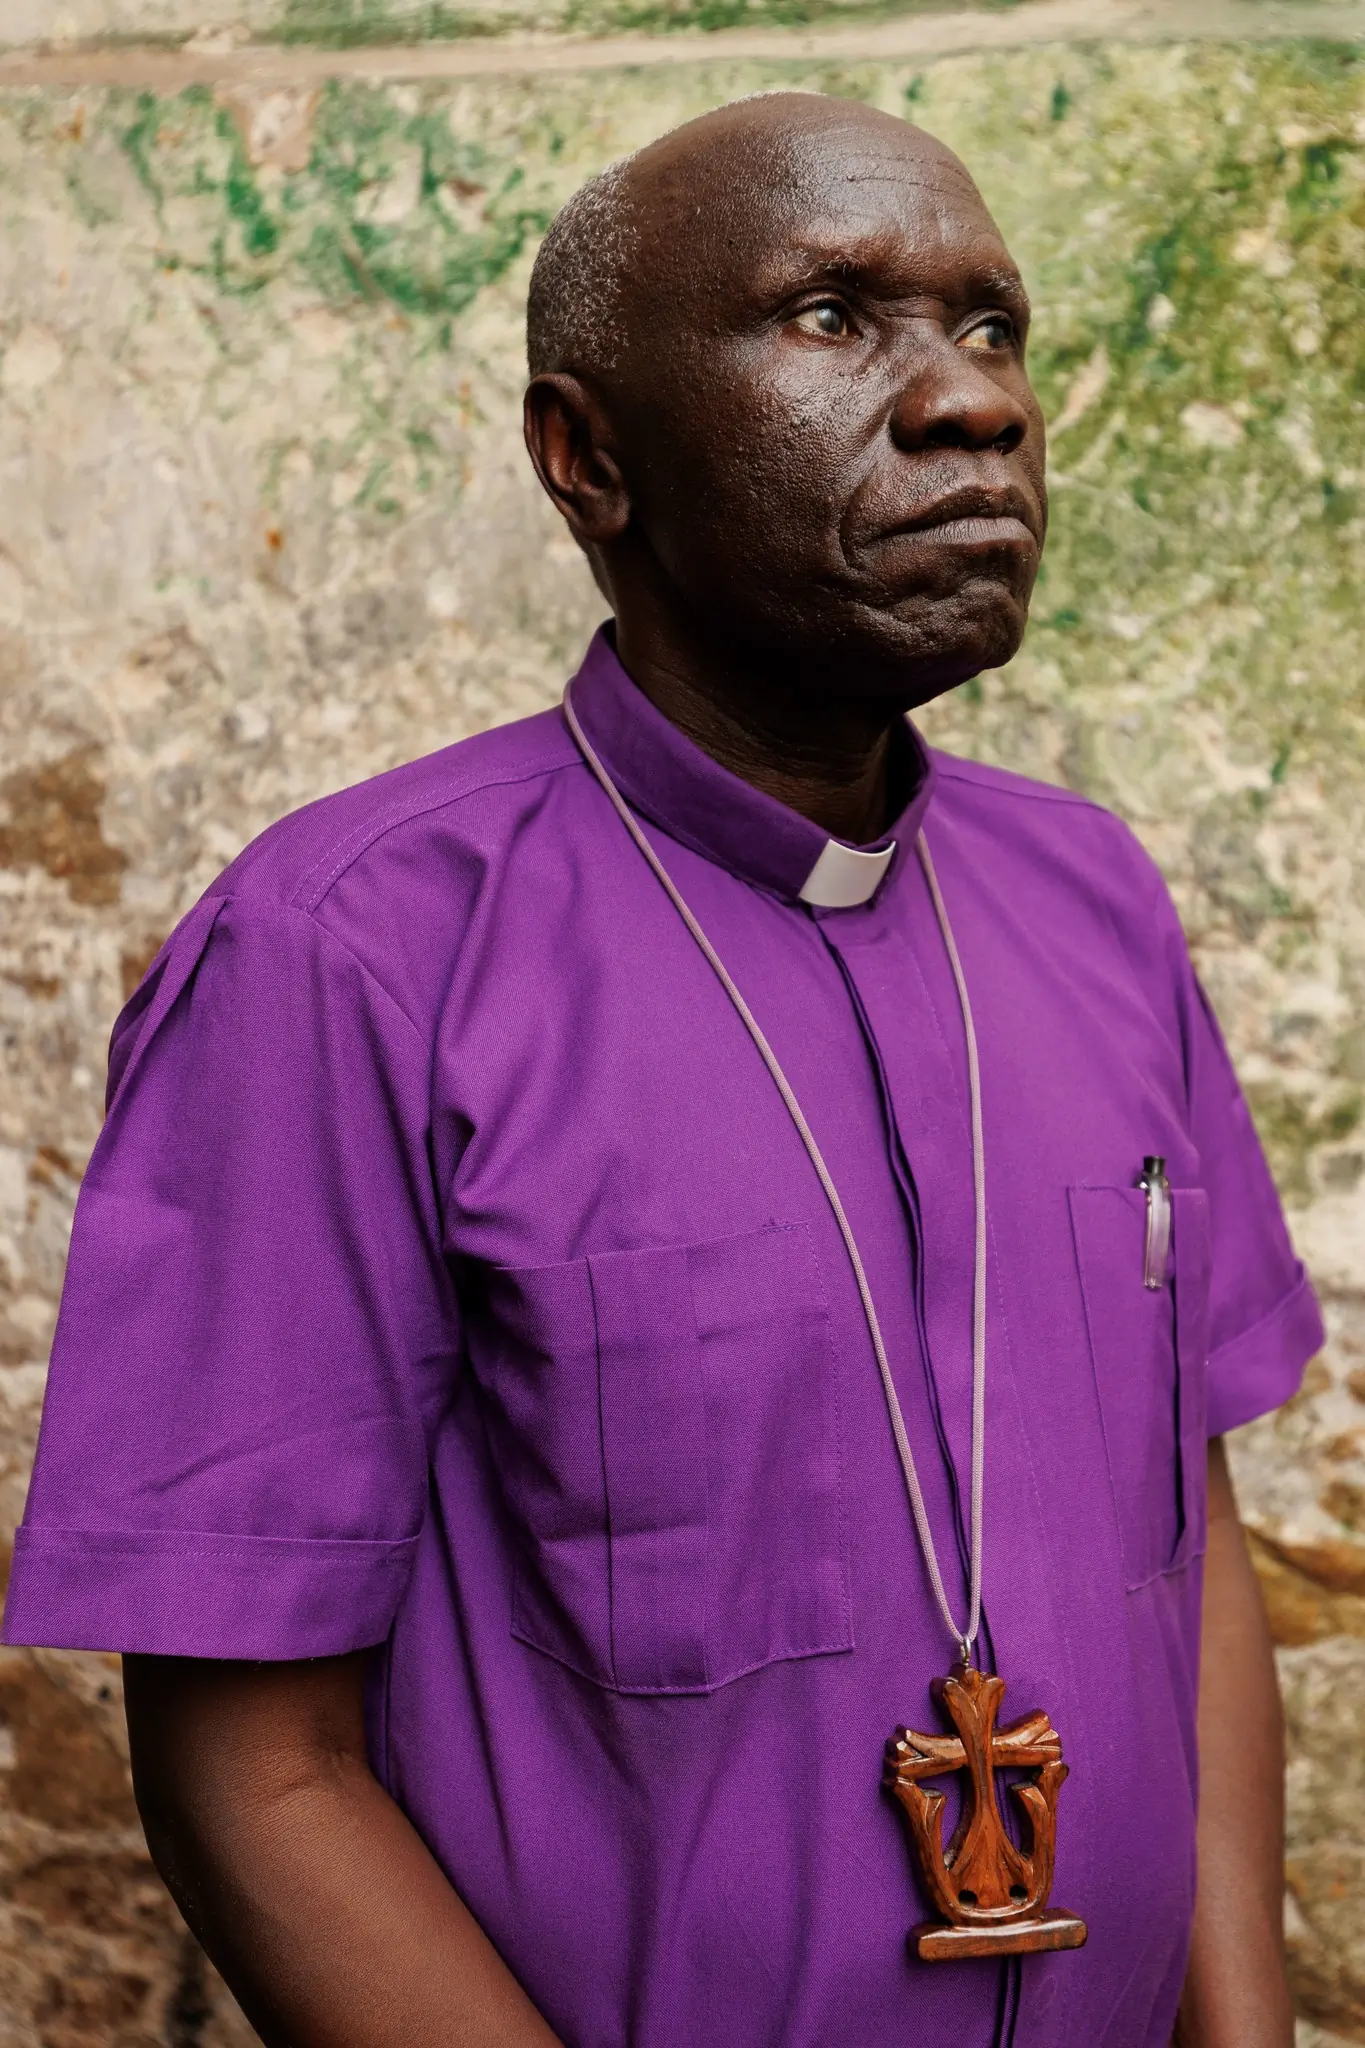 Anthony Poggo, Secretary General of the Anglican Communion, in one of the dungeons at Cape Coast Castle in Ghana used to hold enslaved people before they were loaded onto ships to be taken to the Americas. The eighteenth Anglican Consultative Conference held at the Accra Marriott Hotel, Accra, Ghana